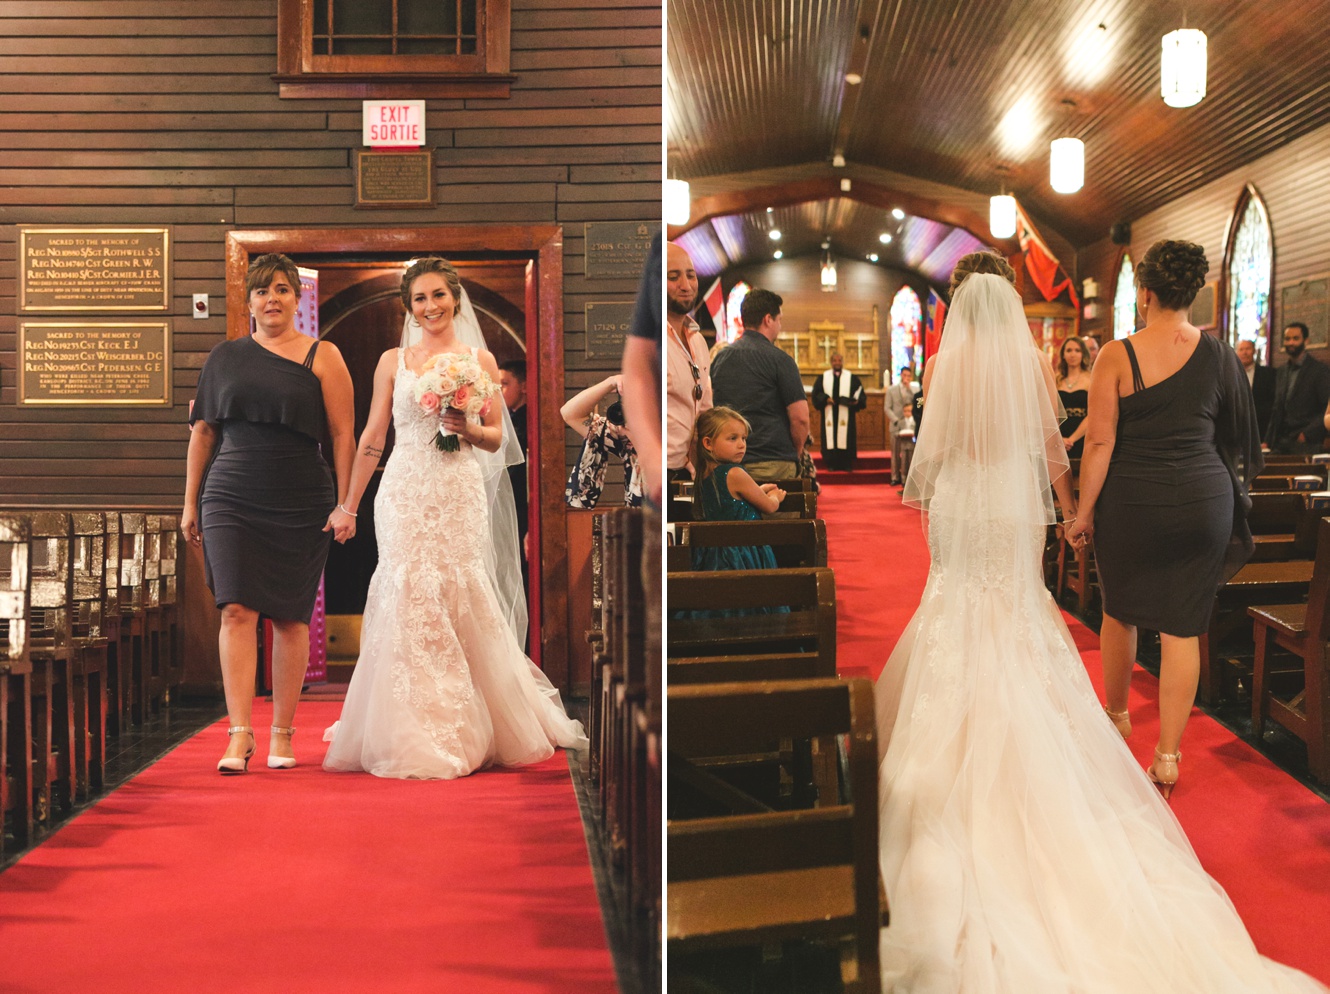 How to photograph a wedding ceremony